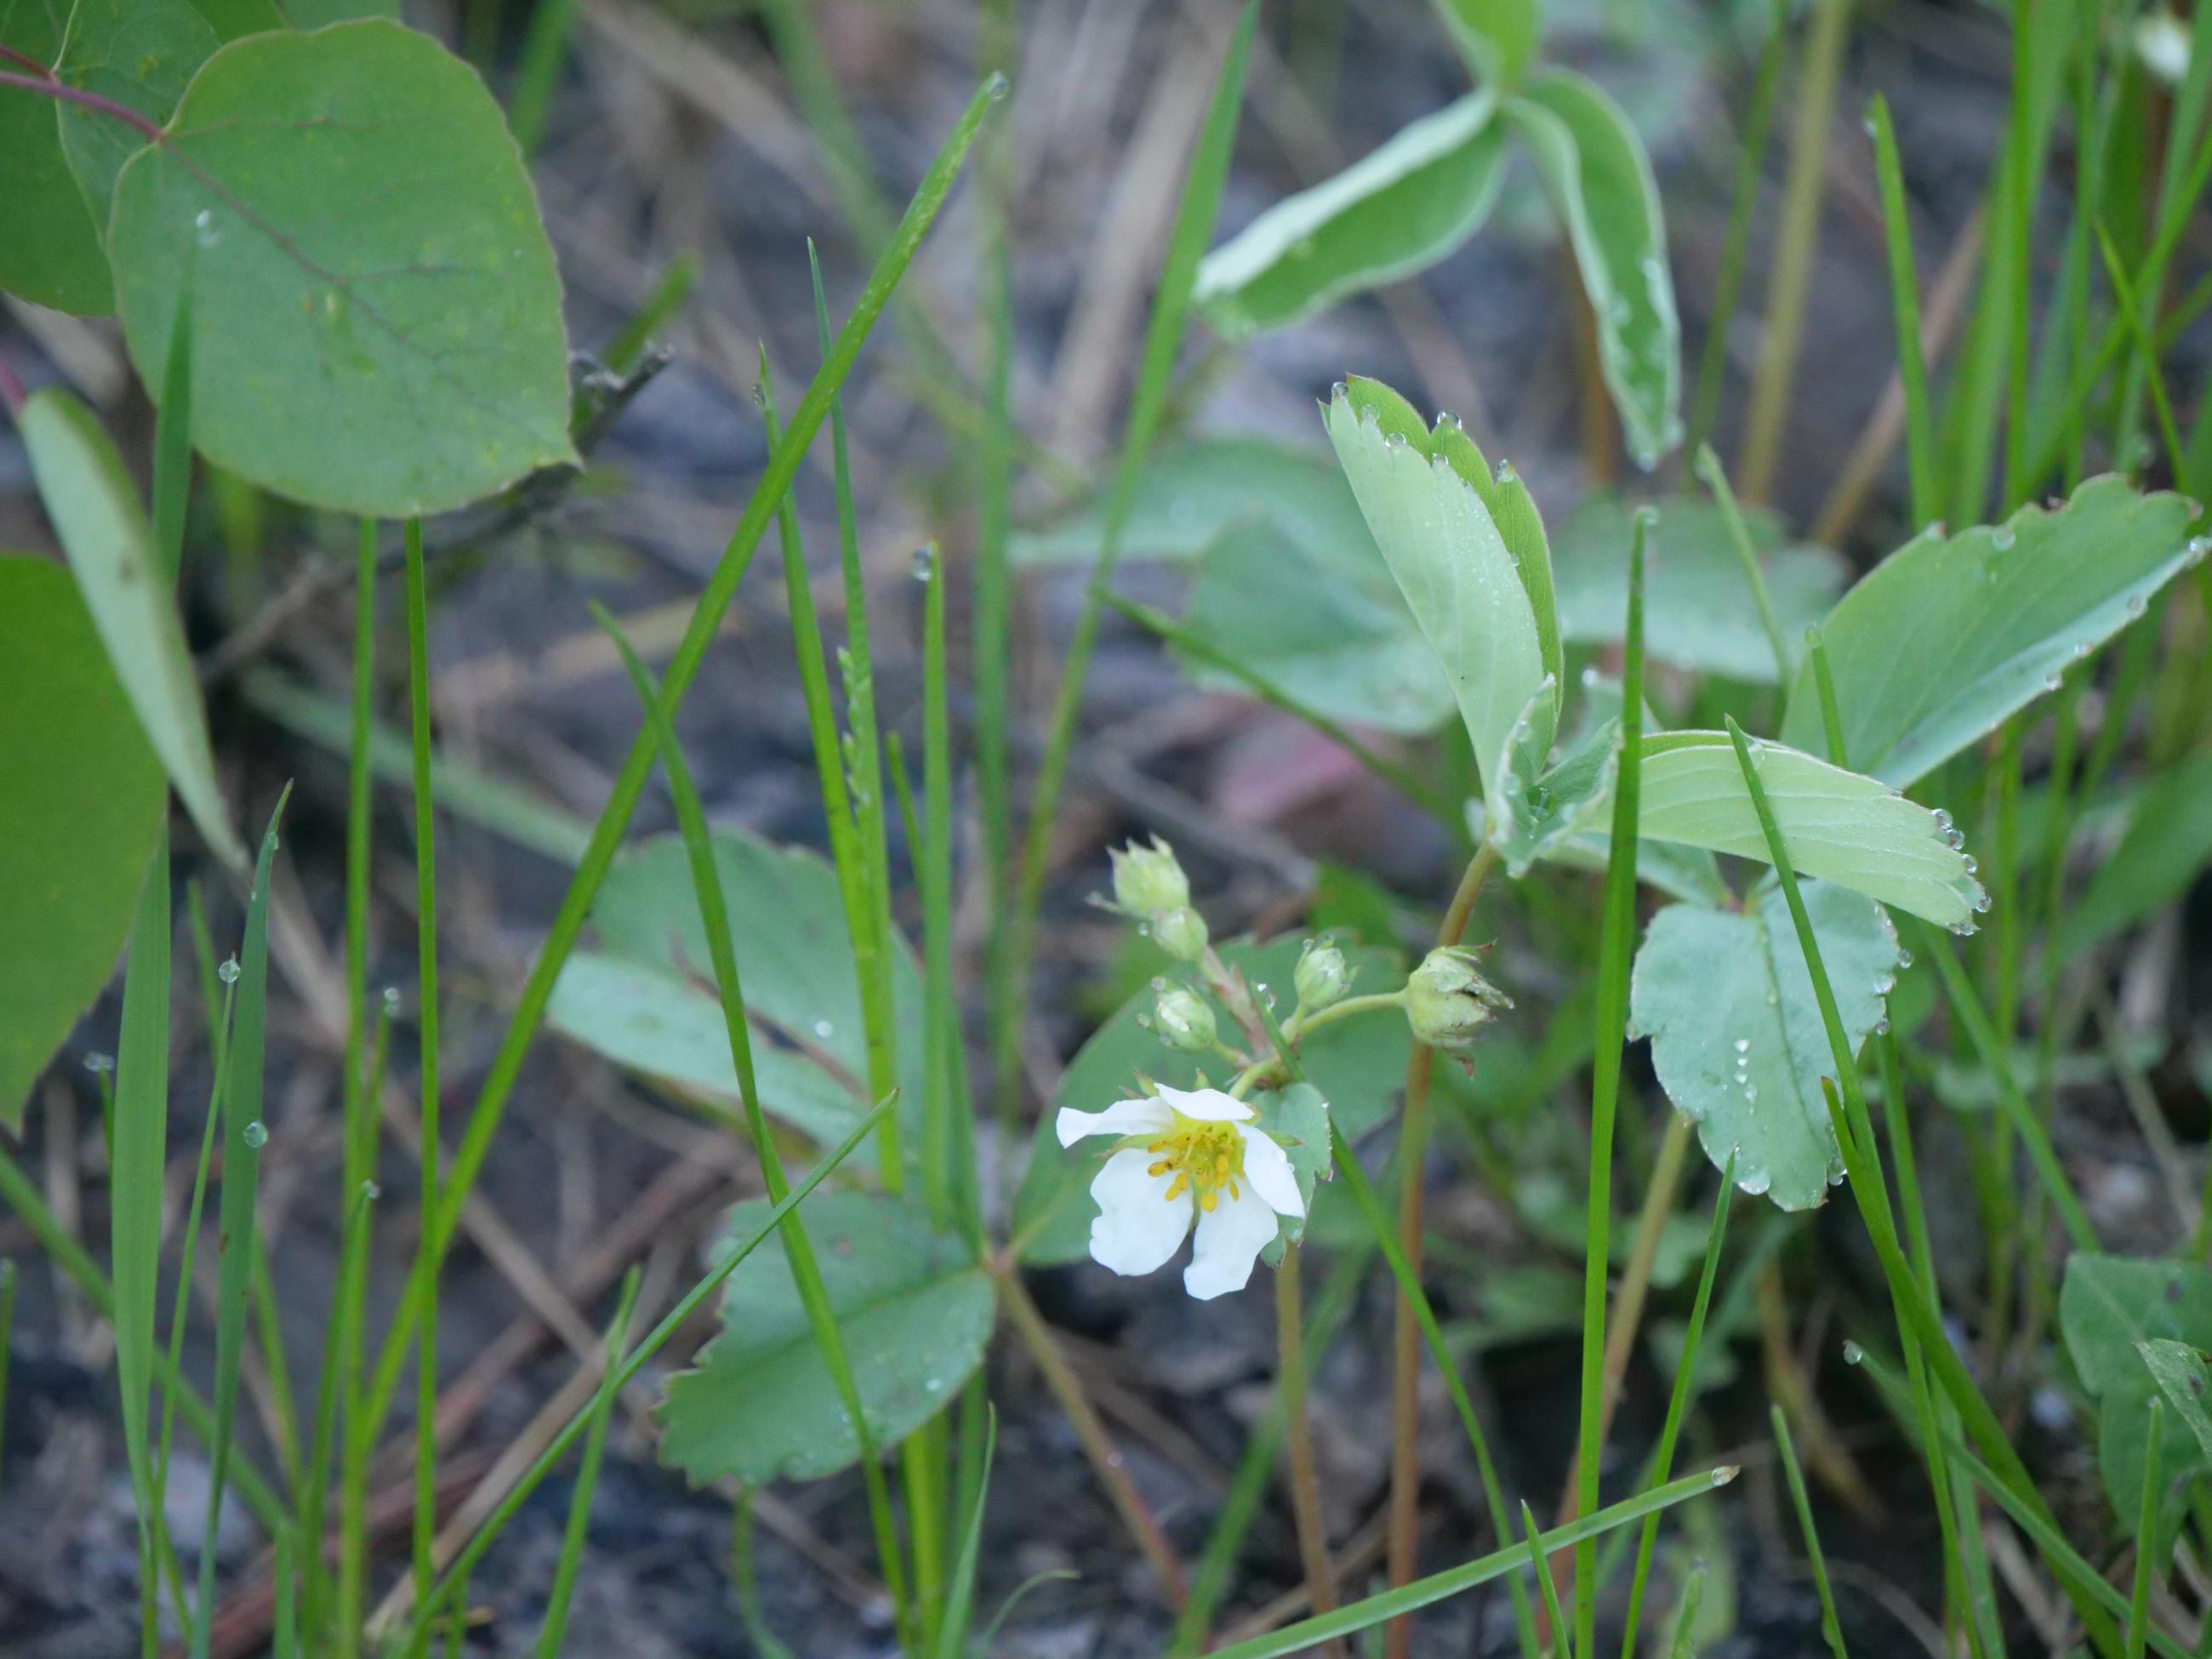 A wild strawberry plant blossoms amid green grass with a blackened area in the background.